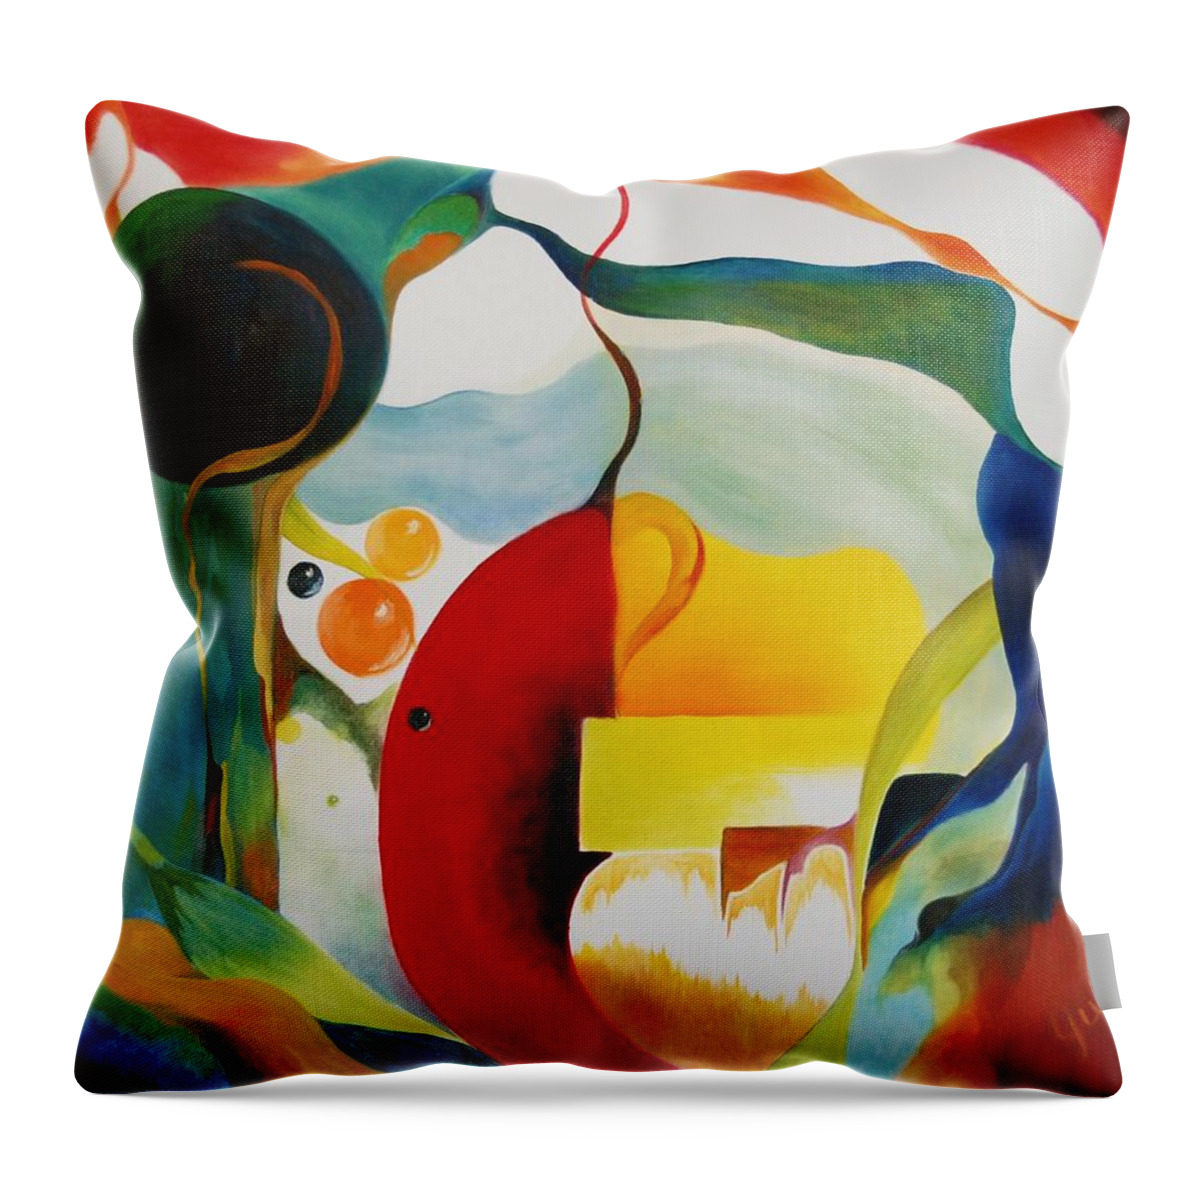 Abstract Throw Pillow featuring the painting Frenzy by Peggy Guichu